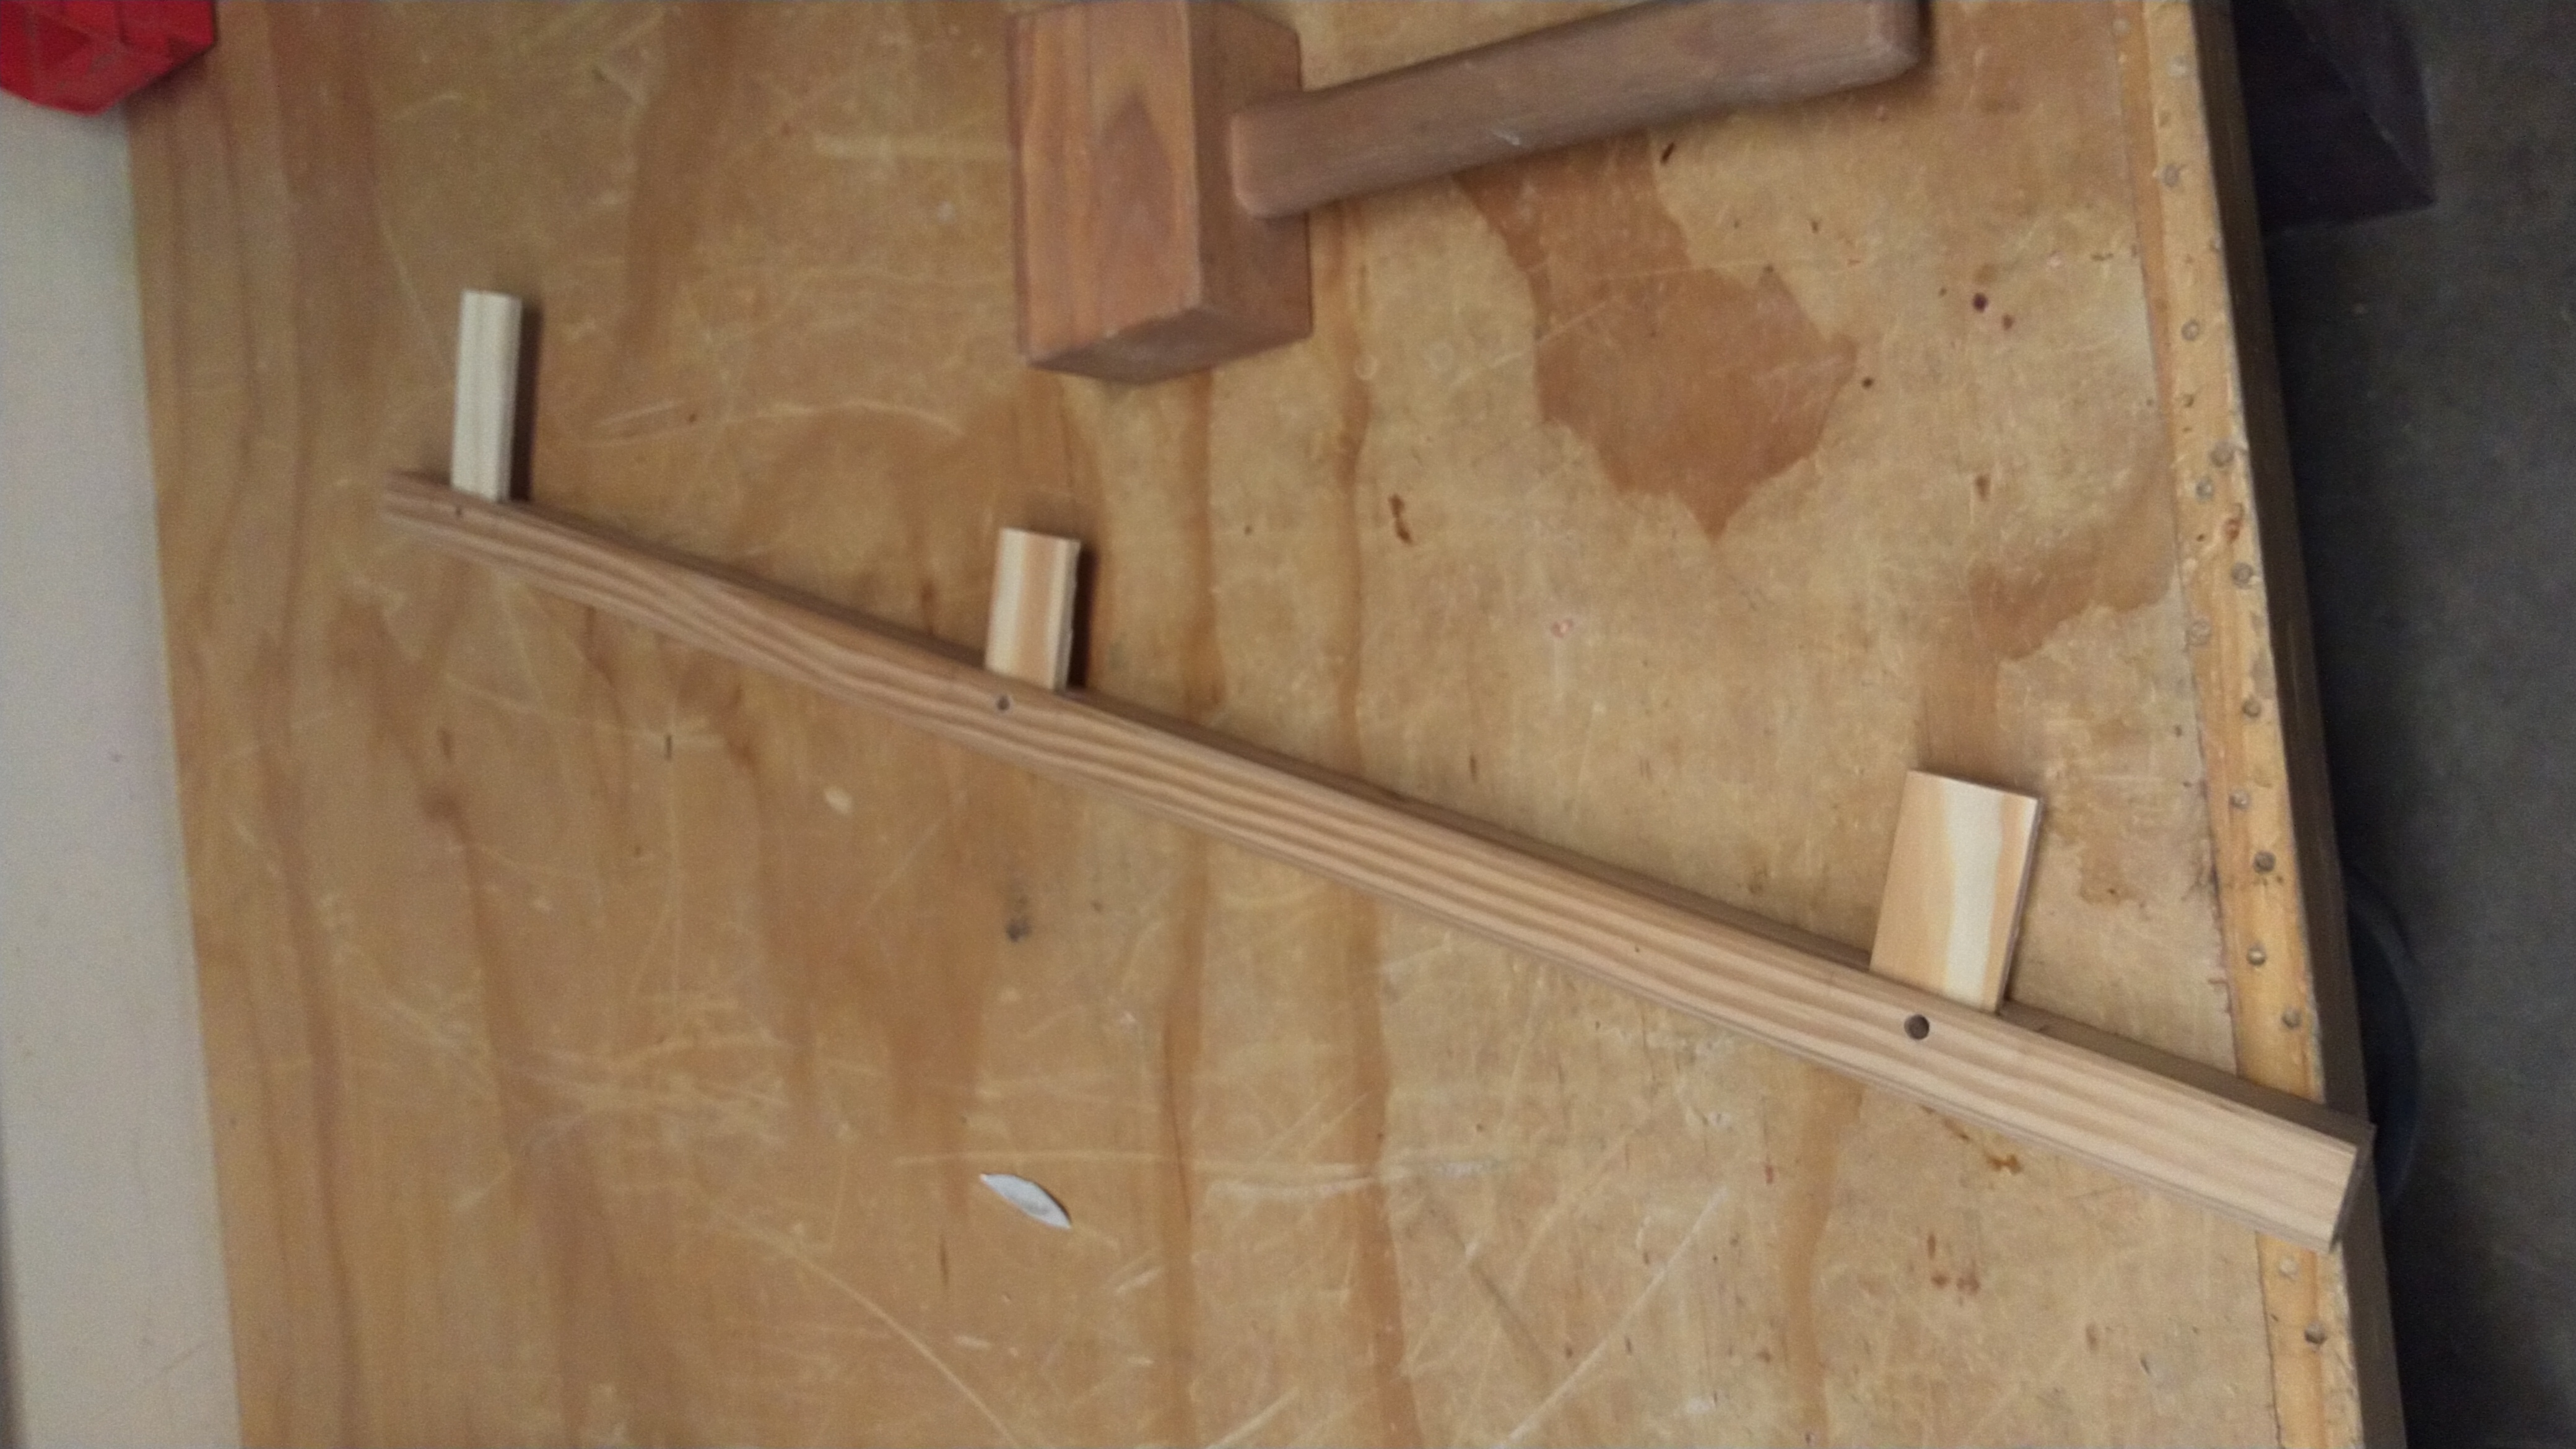 Holes drilled into a piece of wood with mortises